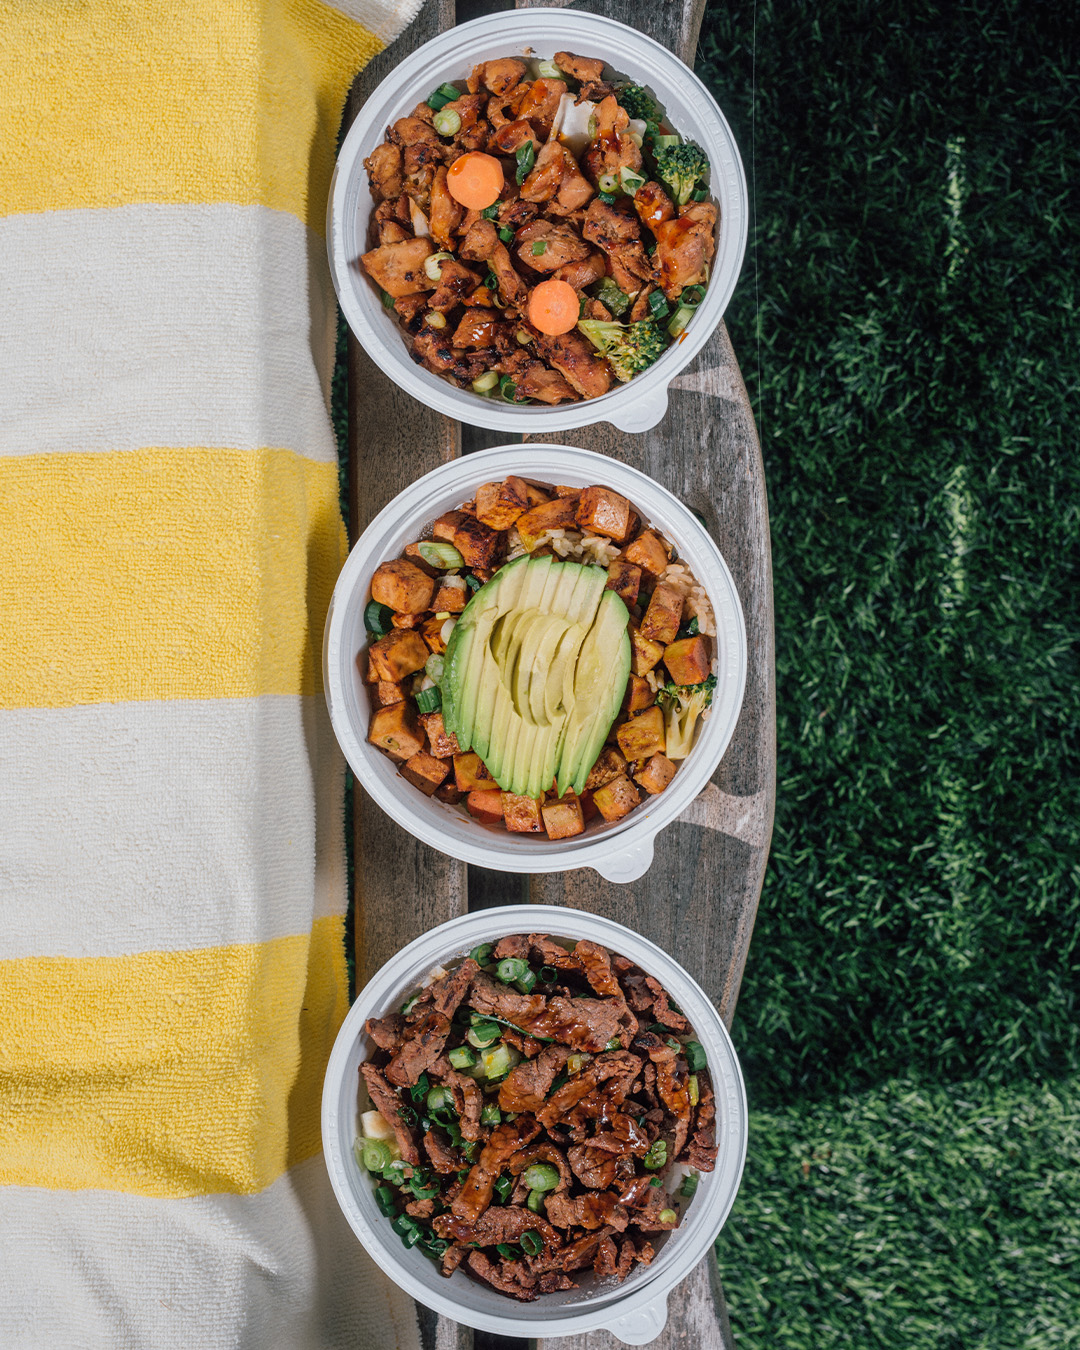 Three rice bowls with meat, vegetables and avocado - The Flame Broiler Menu